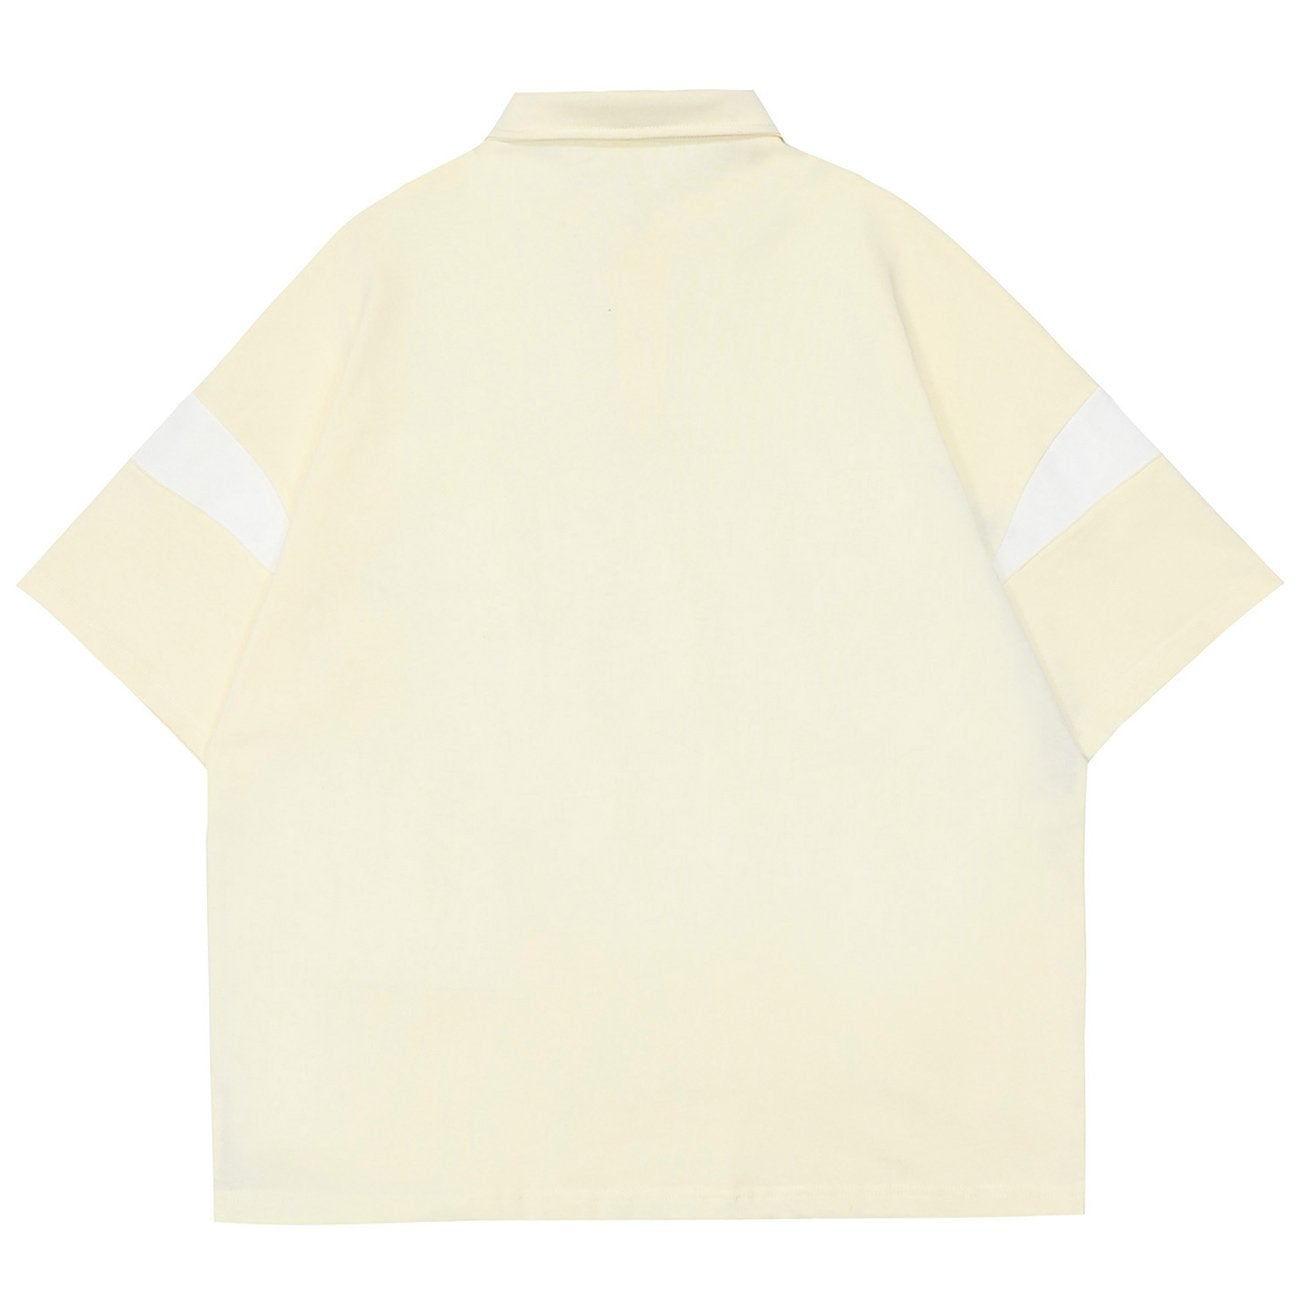 WLS Stitching Polo Collar Tee